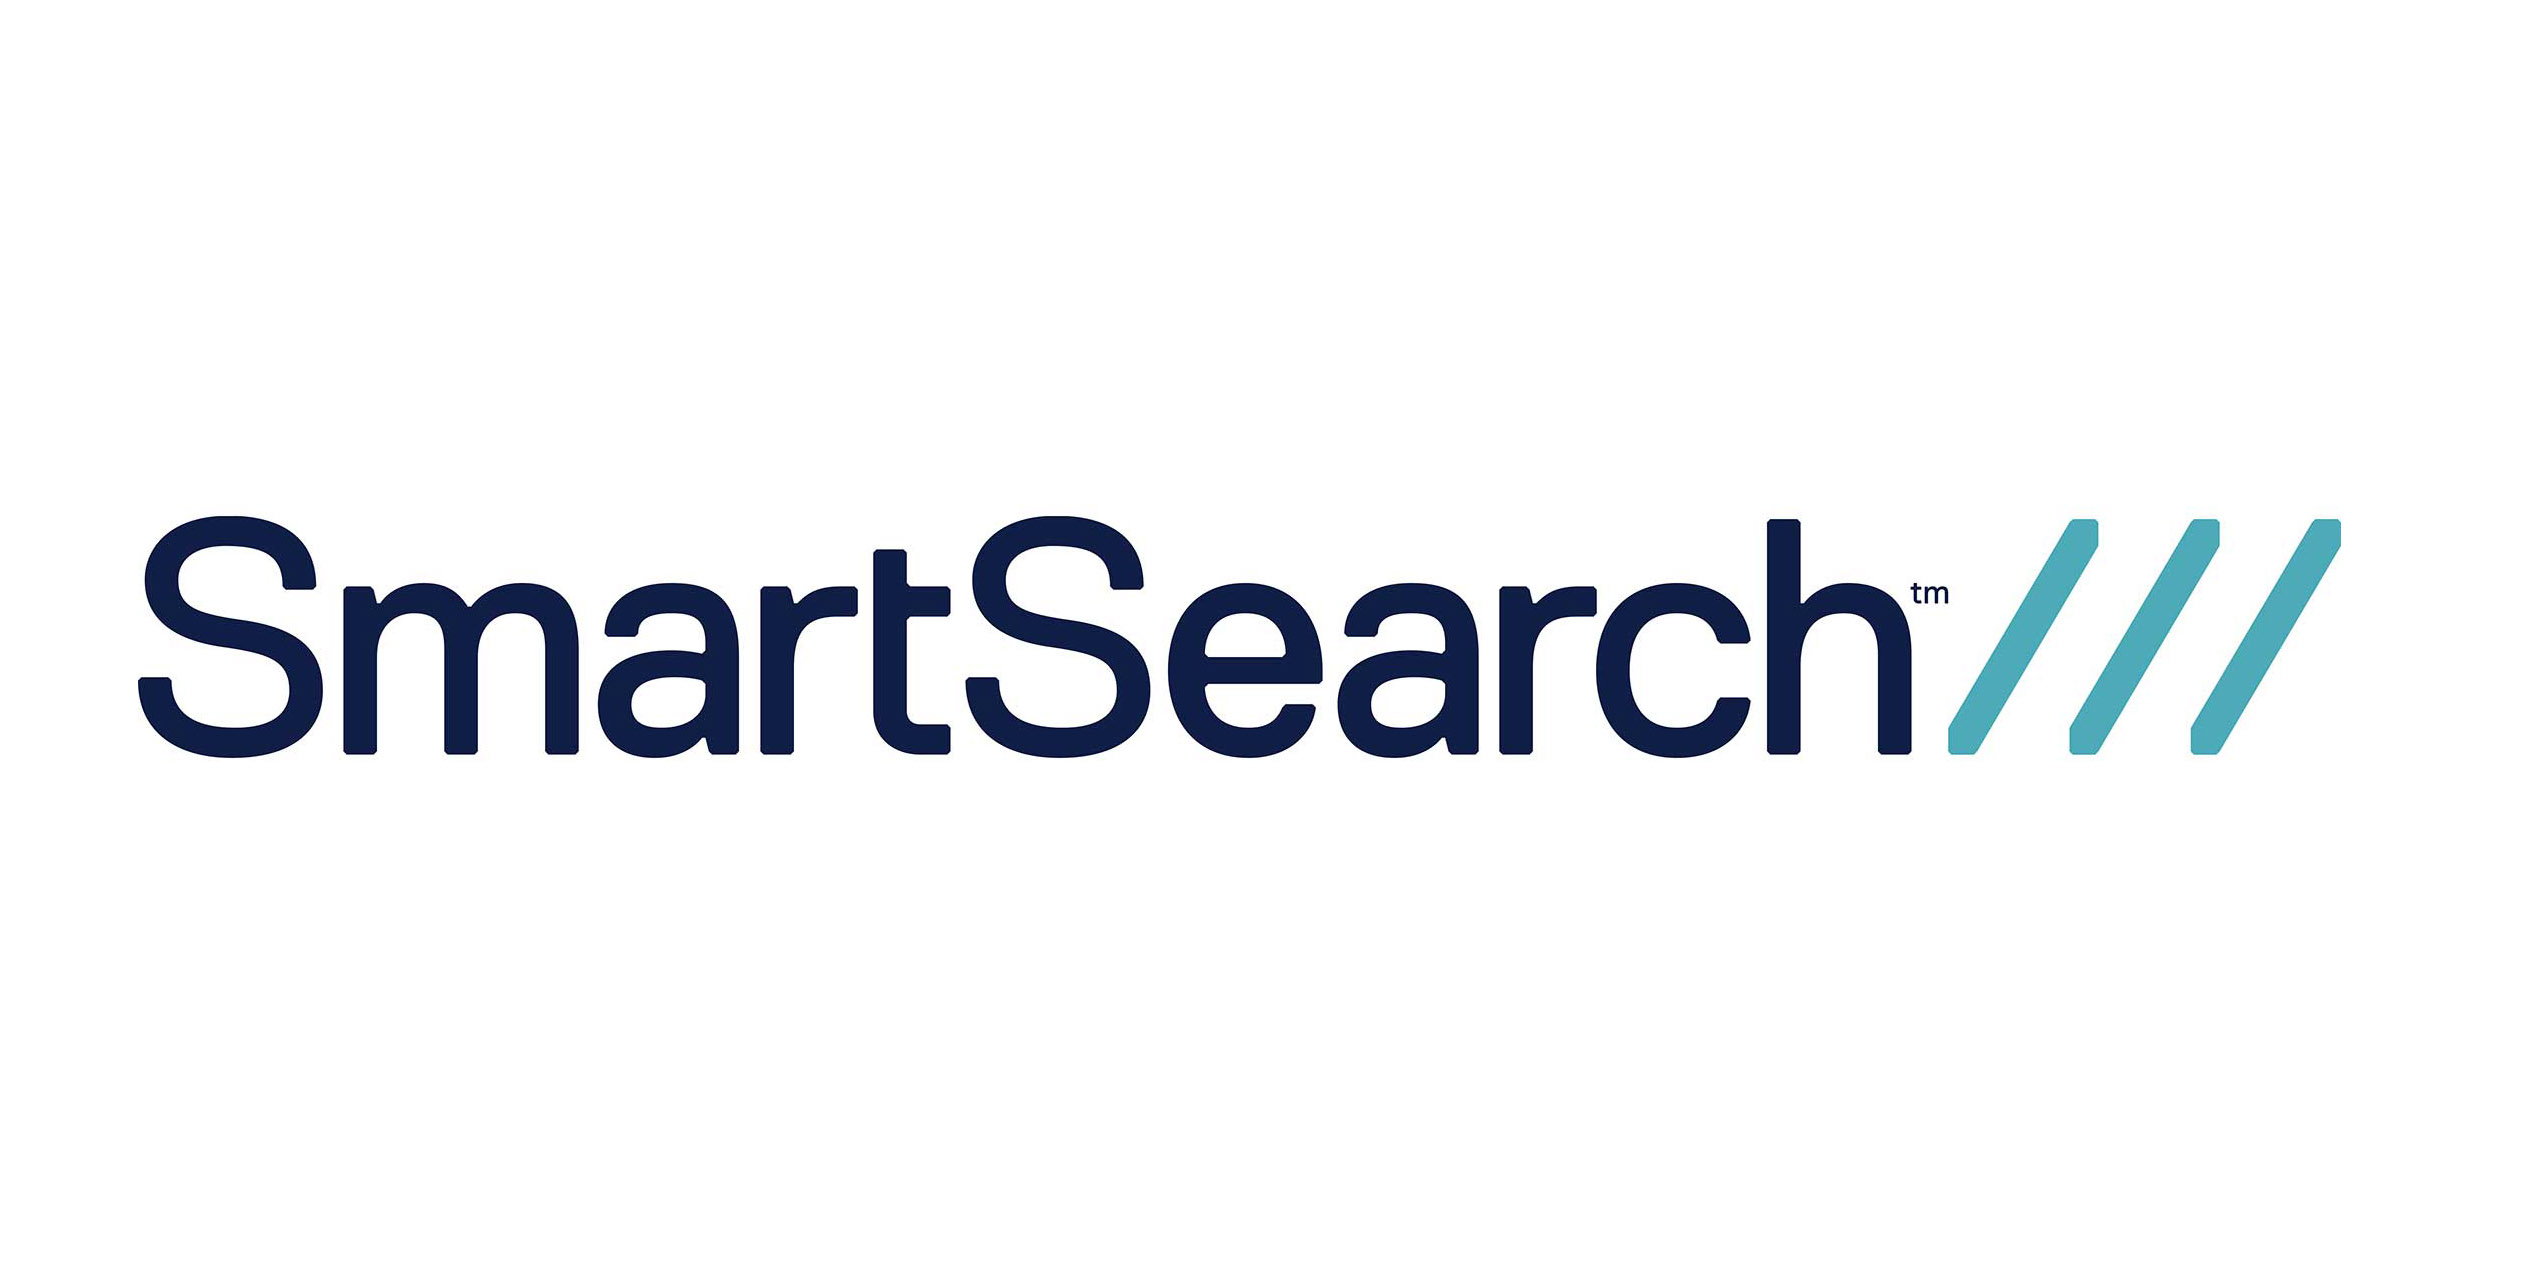 SmartSearch Makes FT list of Fast-Growing European Firms